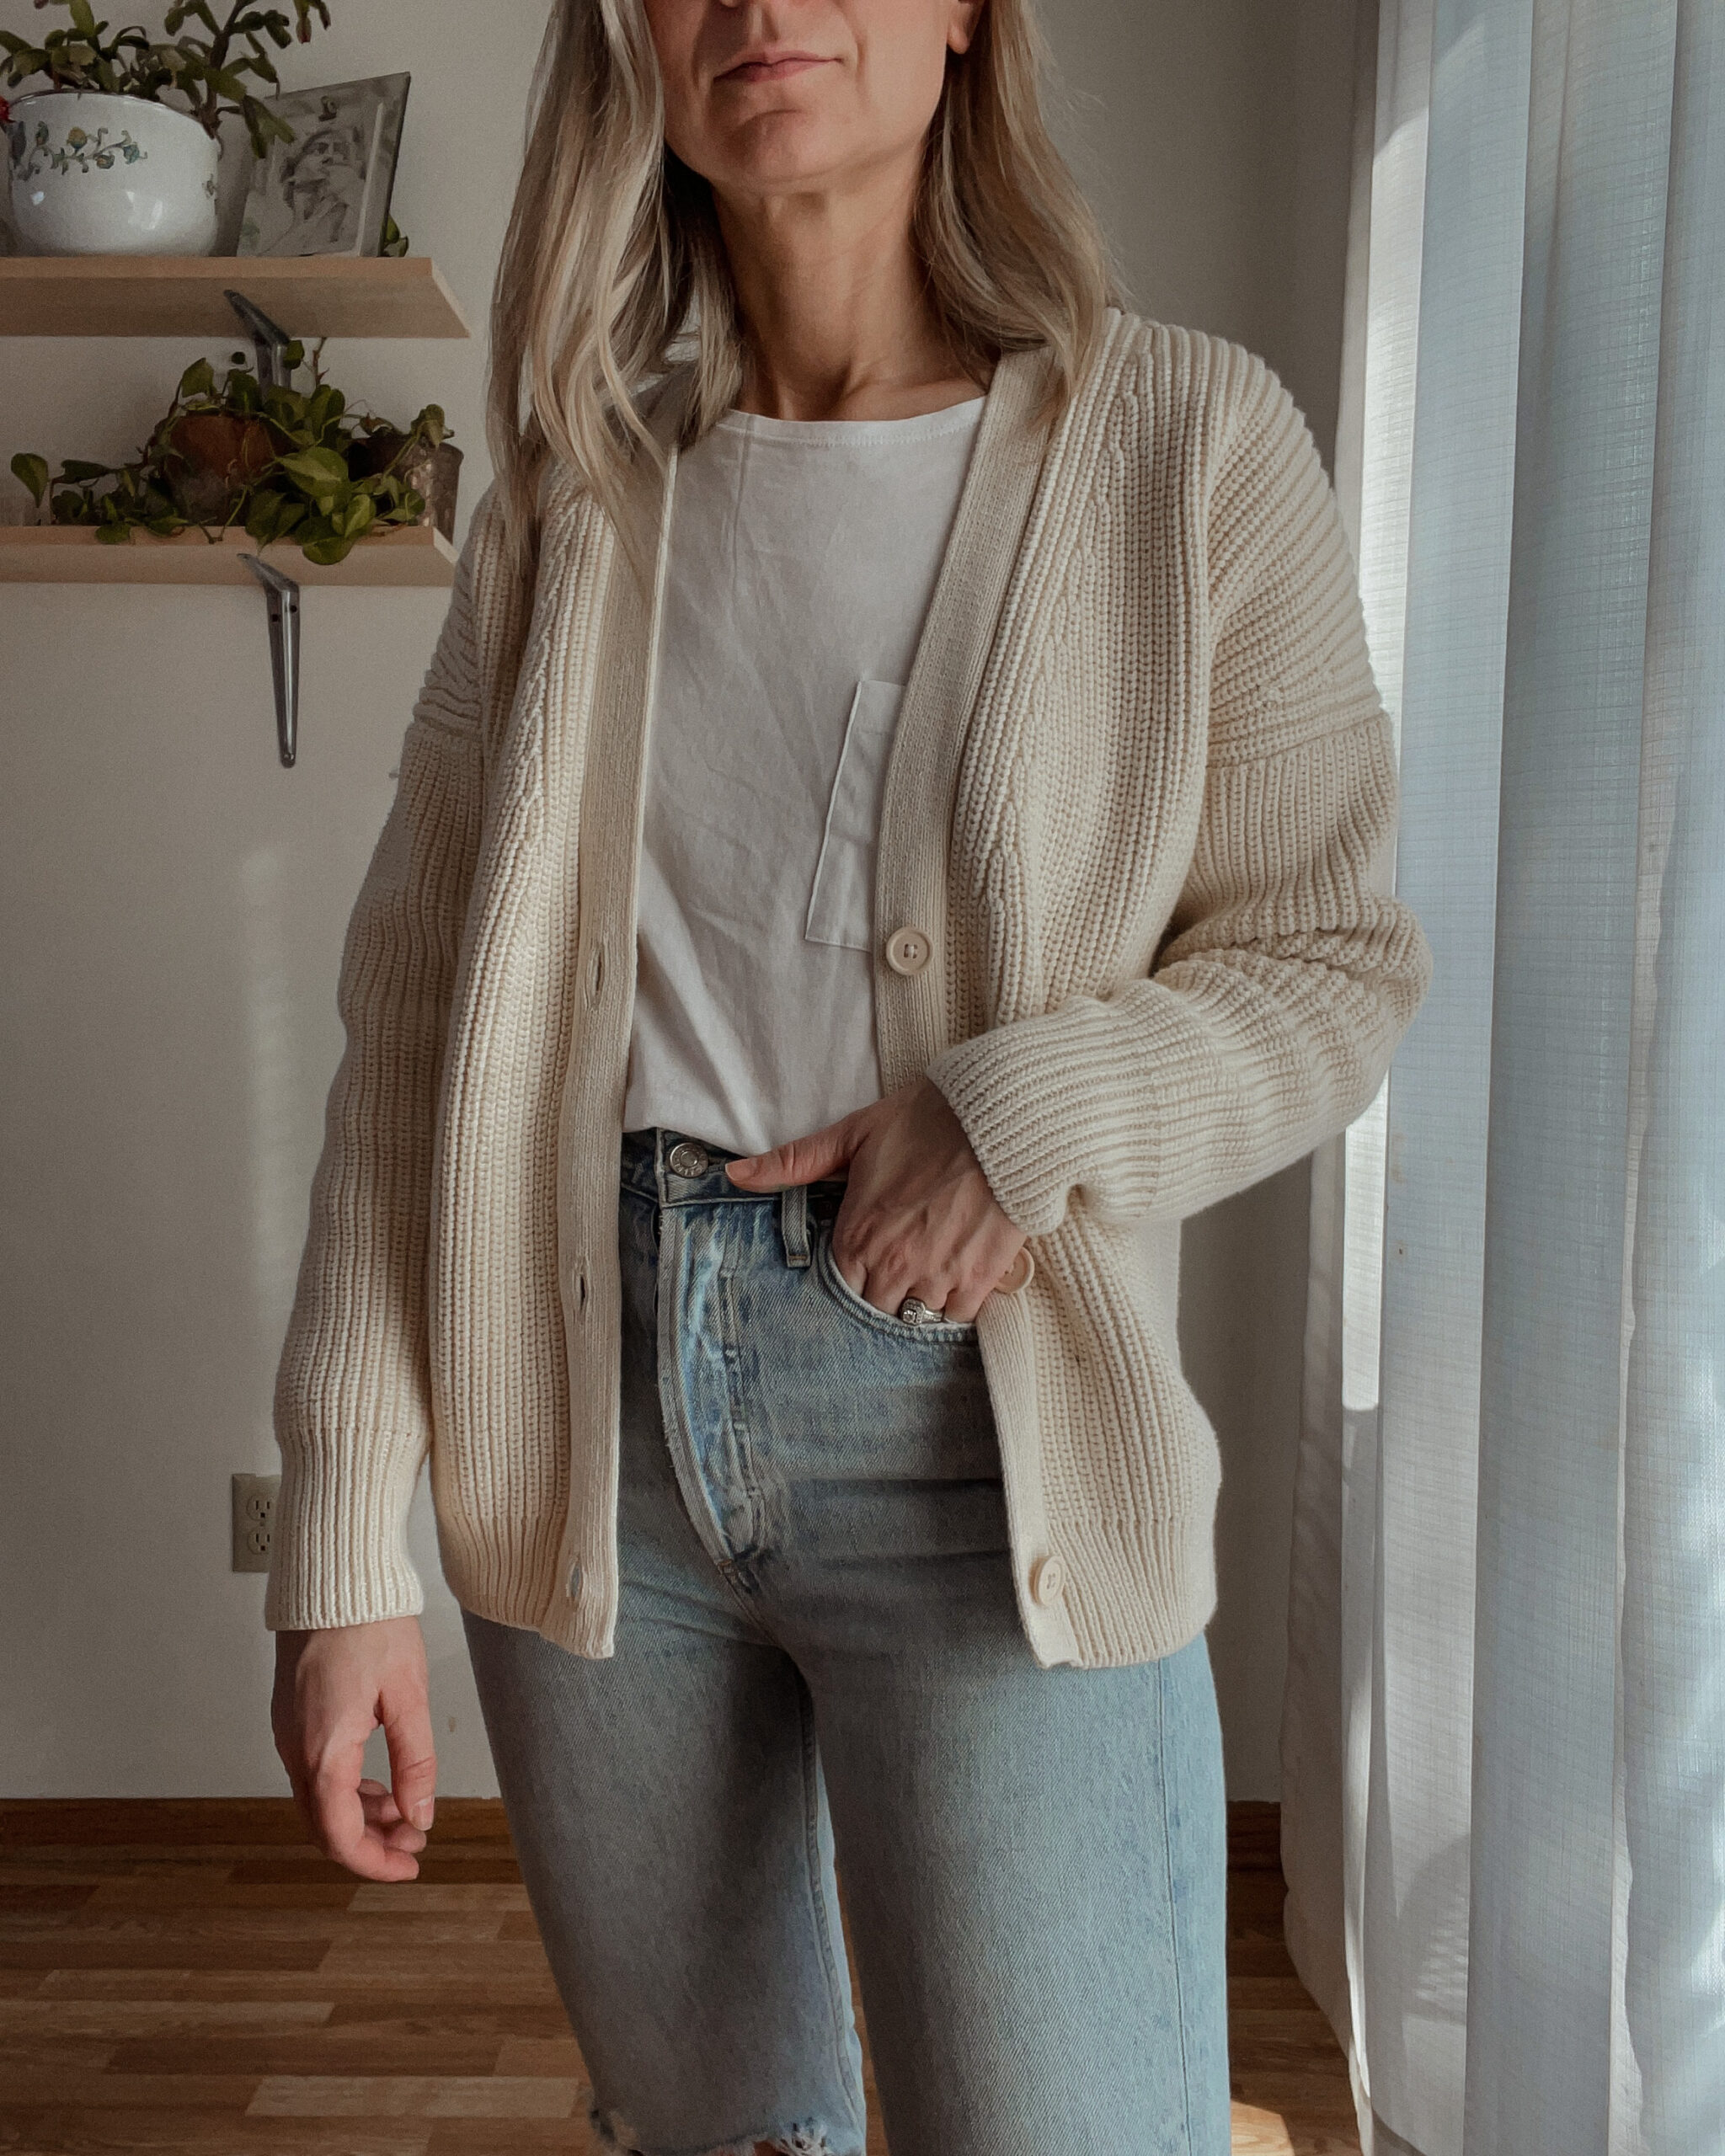 Karin EMily wears a cardigan, white tee, and agolde riley jeans